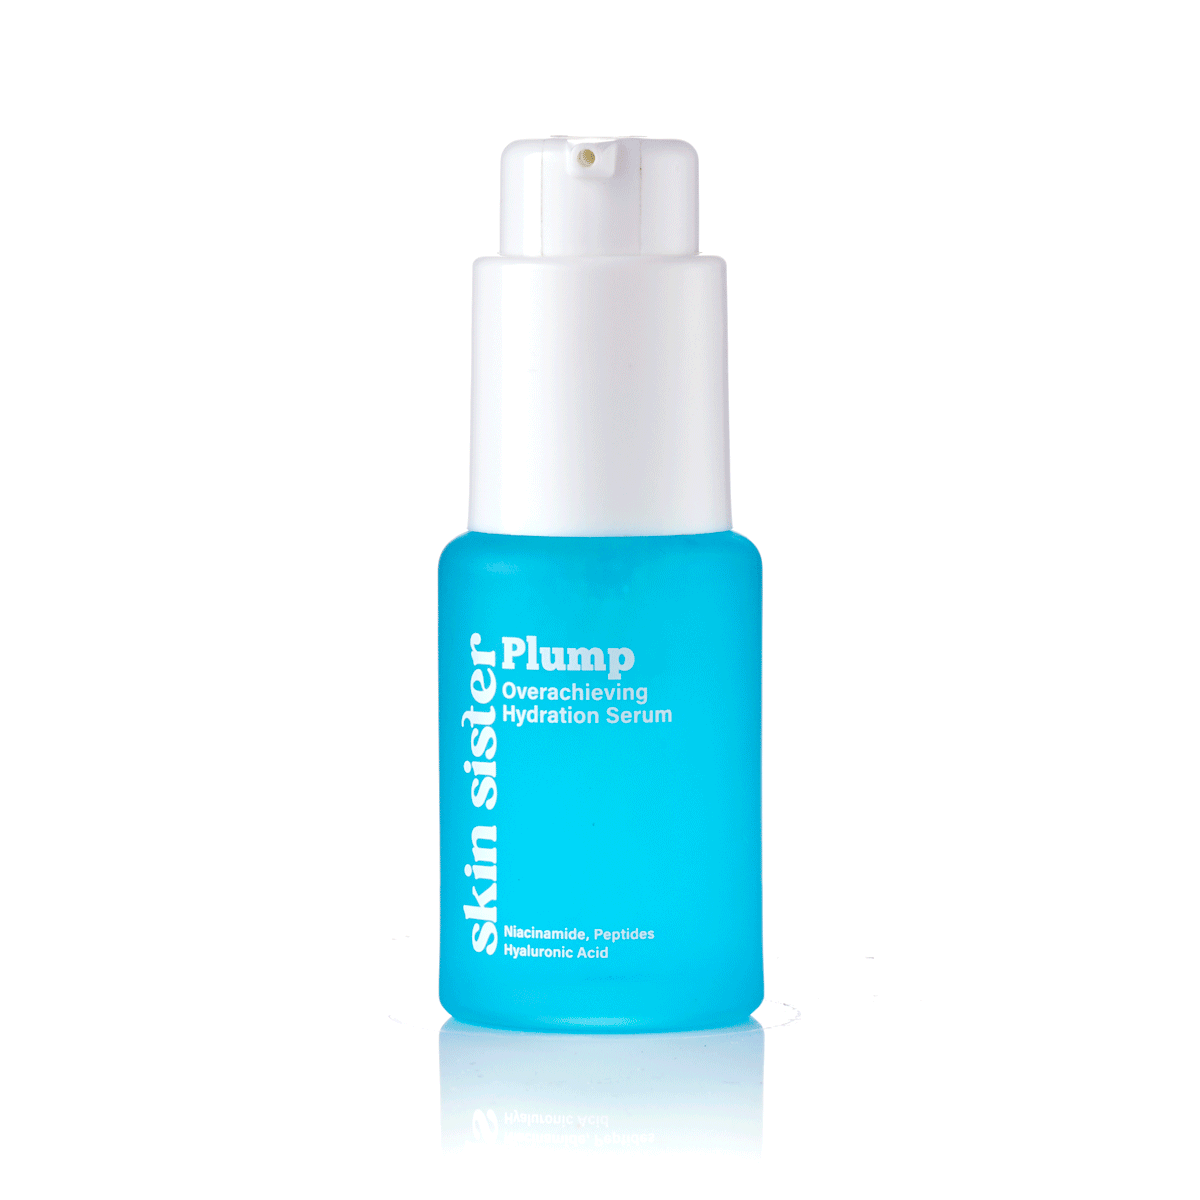 Hydrating and anti-ageing serum, hyaluronic acid, niacinamide and peptide. 360 spinning photo